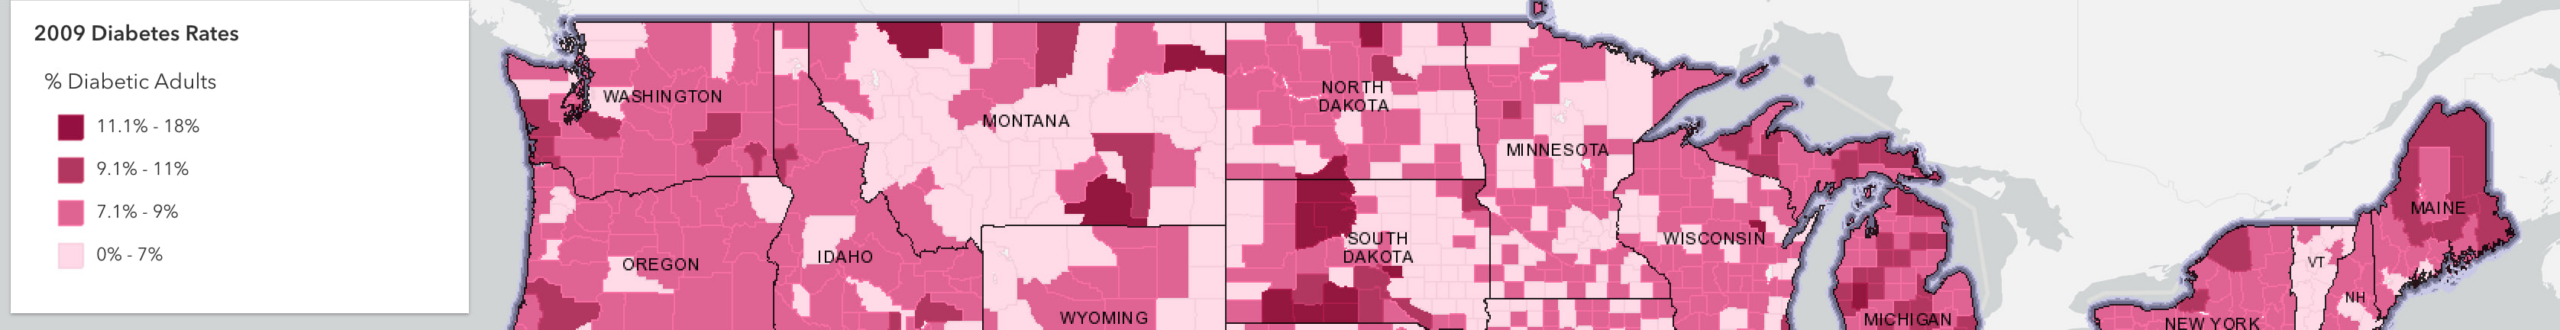 Diabetes rates by county map